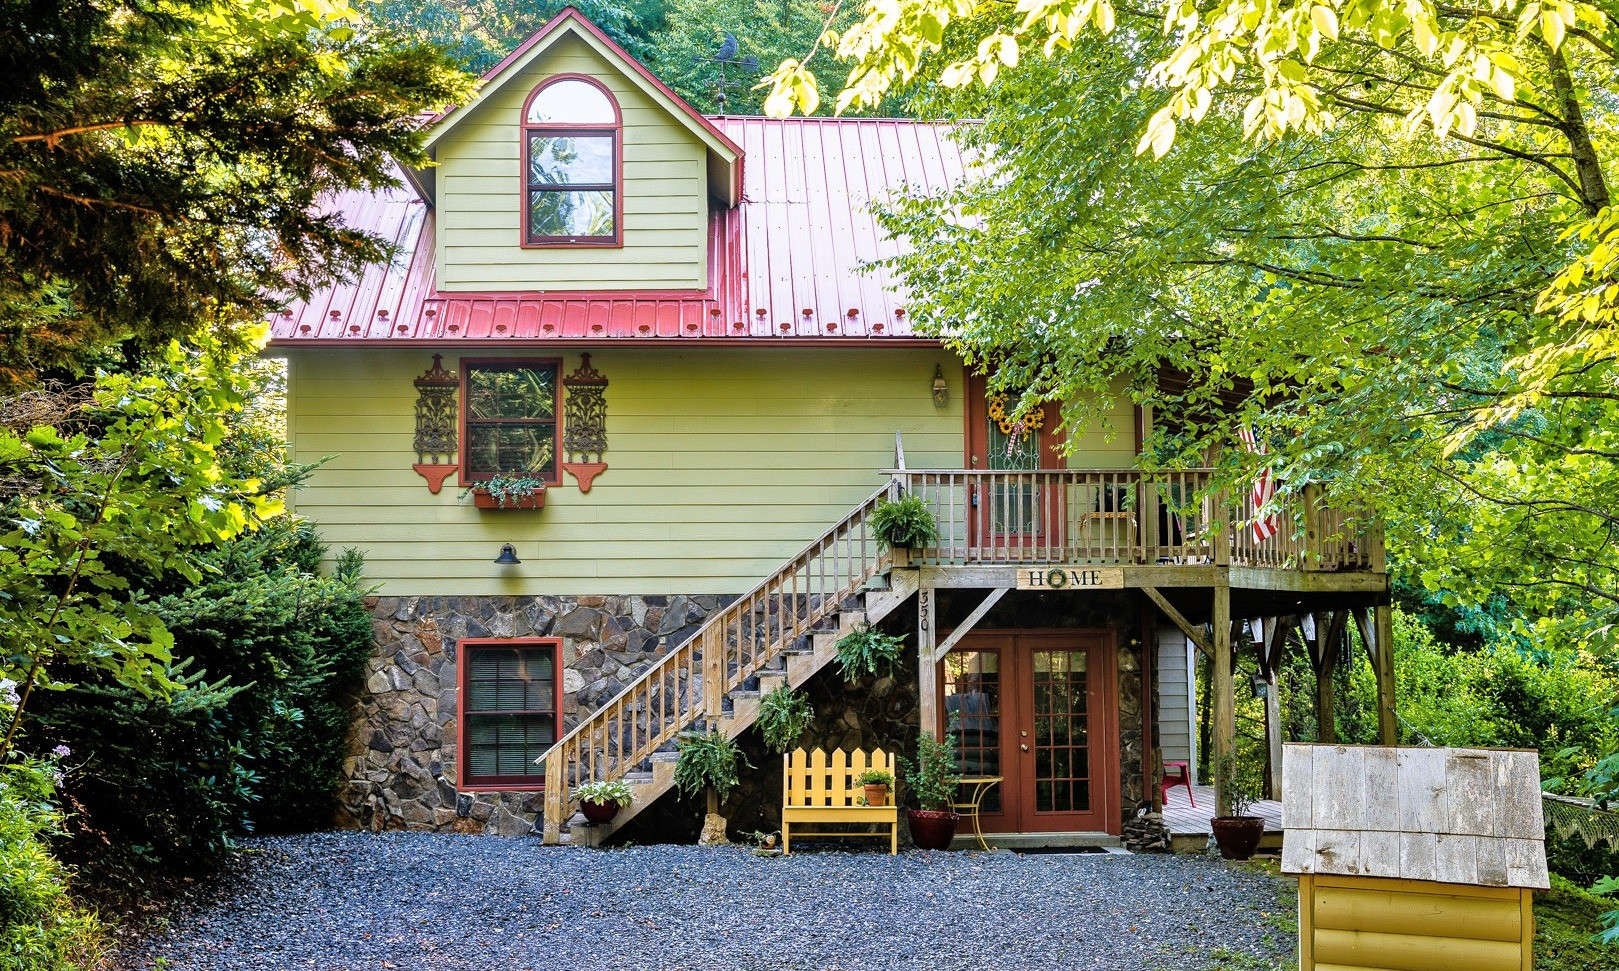 Nestled back in a wooded 3.5 acre setting in the River Hills community, this sweet Blue Ridge Mountain cottage offers a quiet place to relax and enjoy long range mountain views.